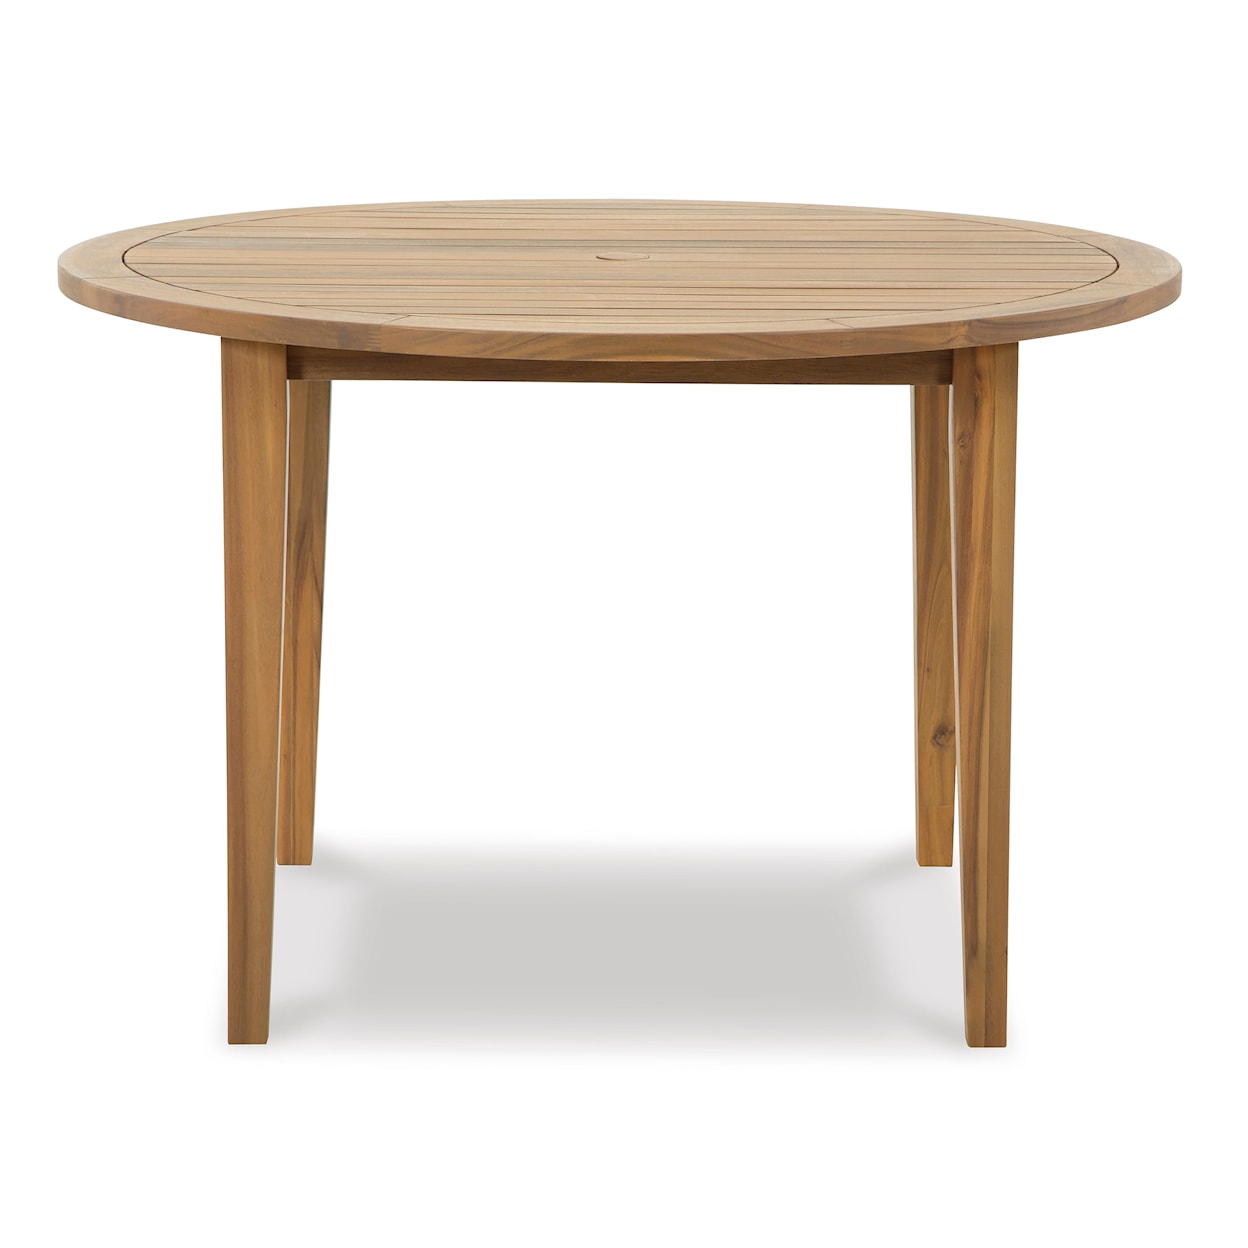 Ashley Furniture Signature Design Janiyah Outdoor Dining Table